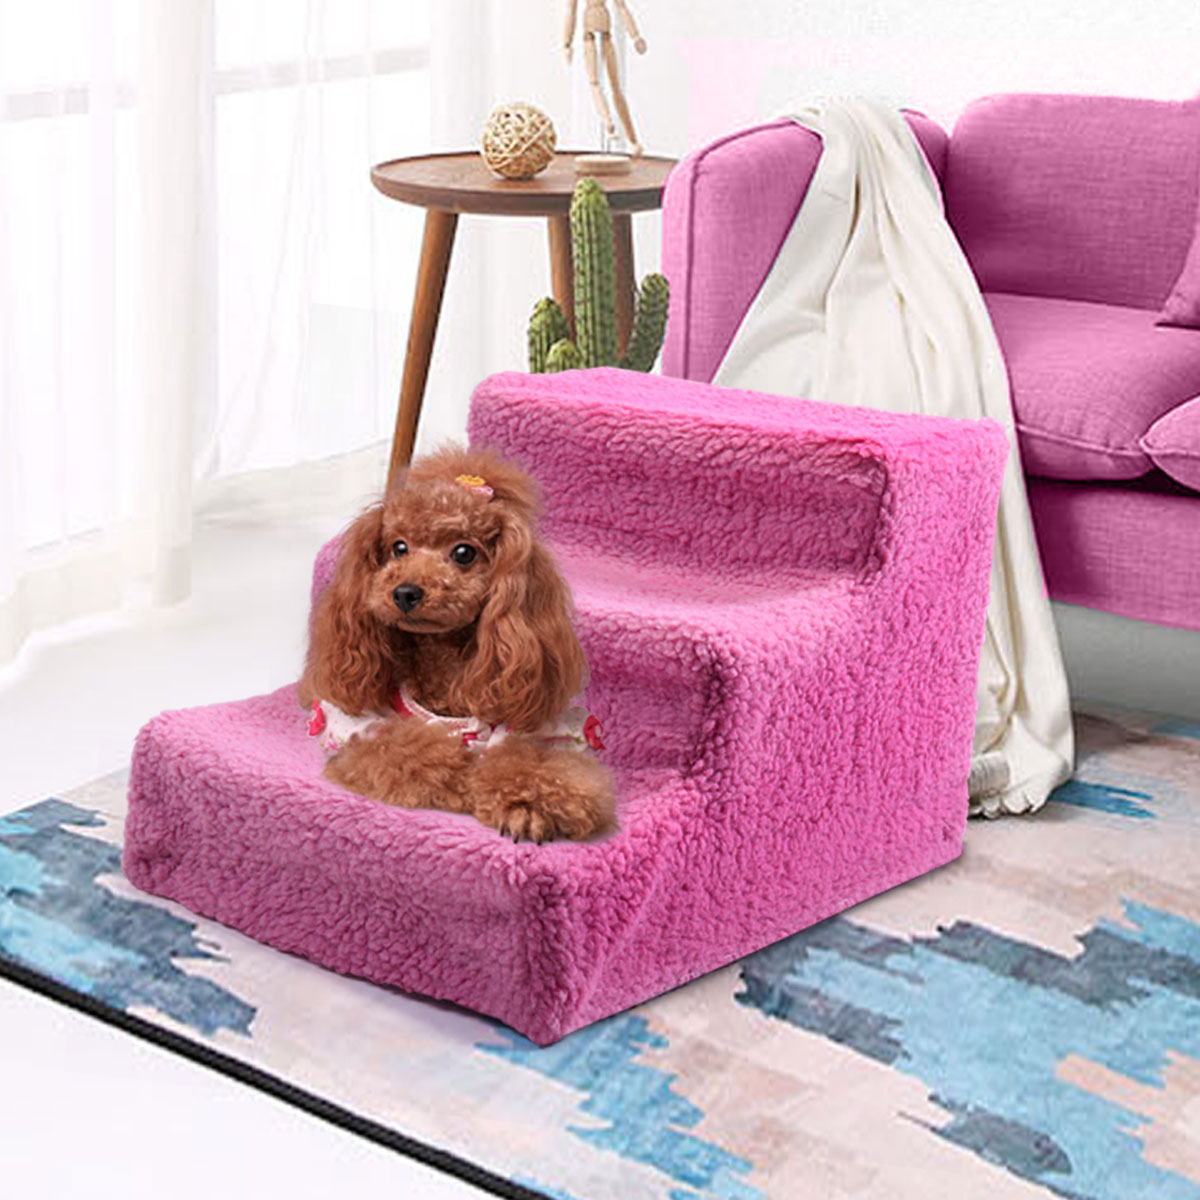 Coziwow Pet Stairs 3 Steps Indoor Dog Cat Steps Removable Washable Pets Ramp Ladder Pink - image 1 of 10